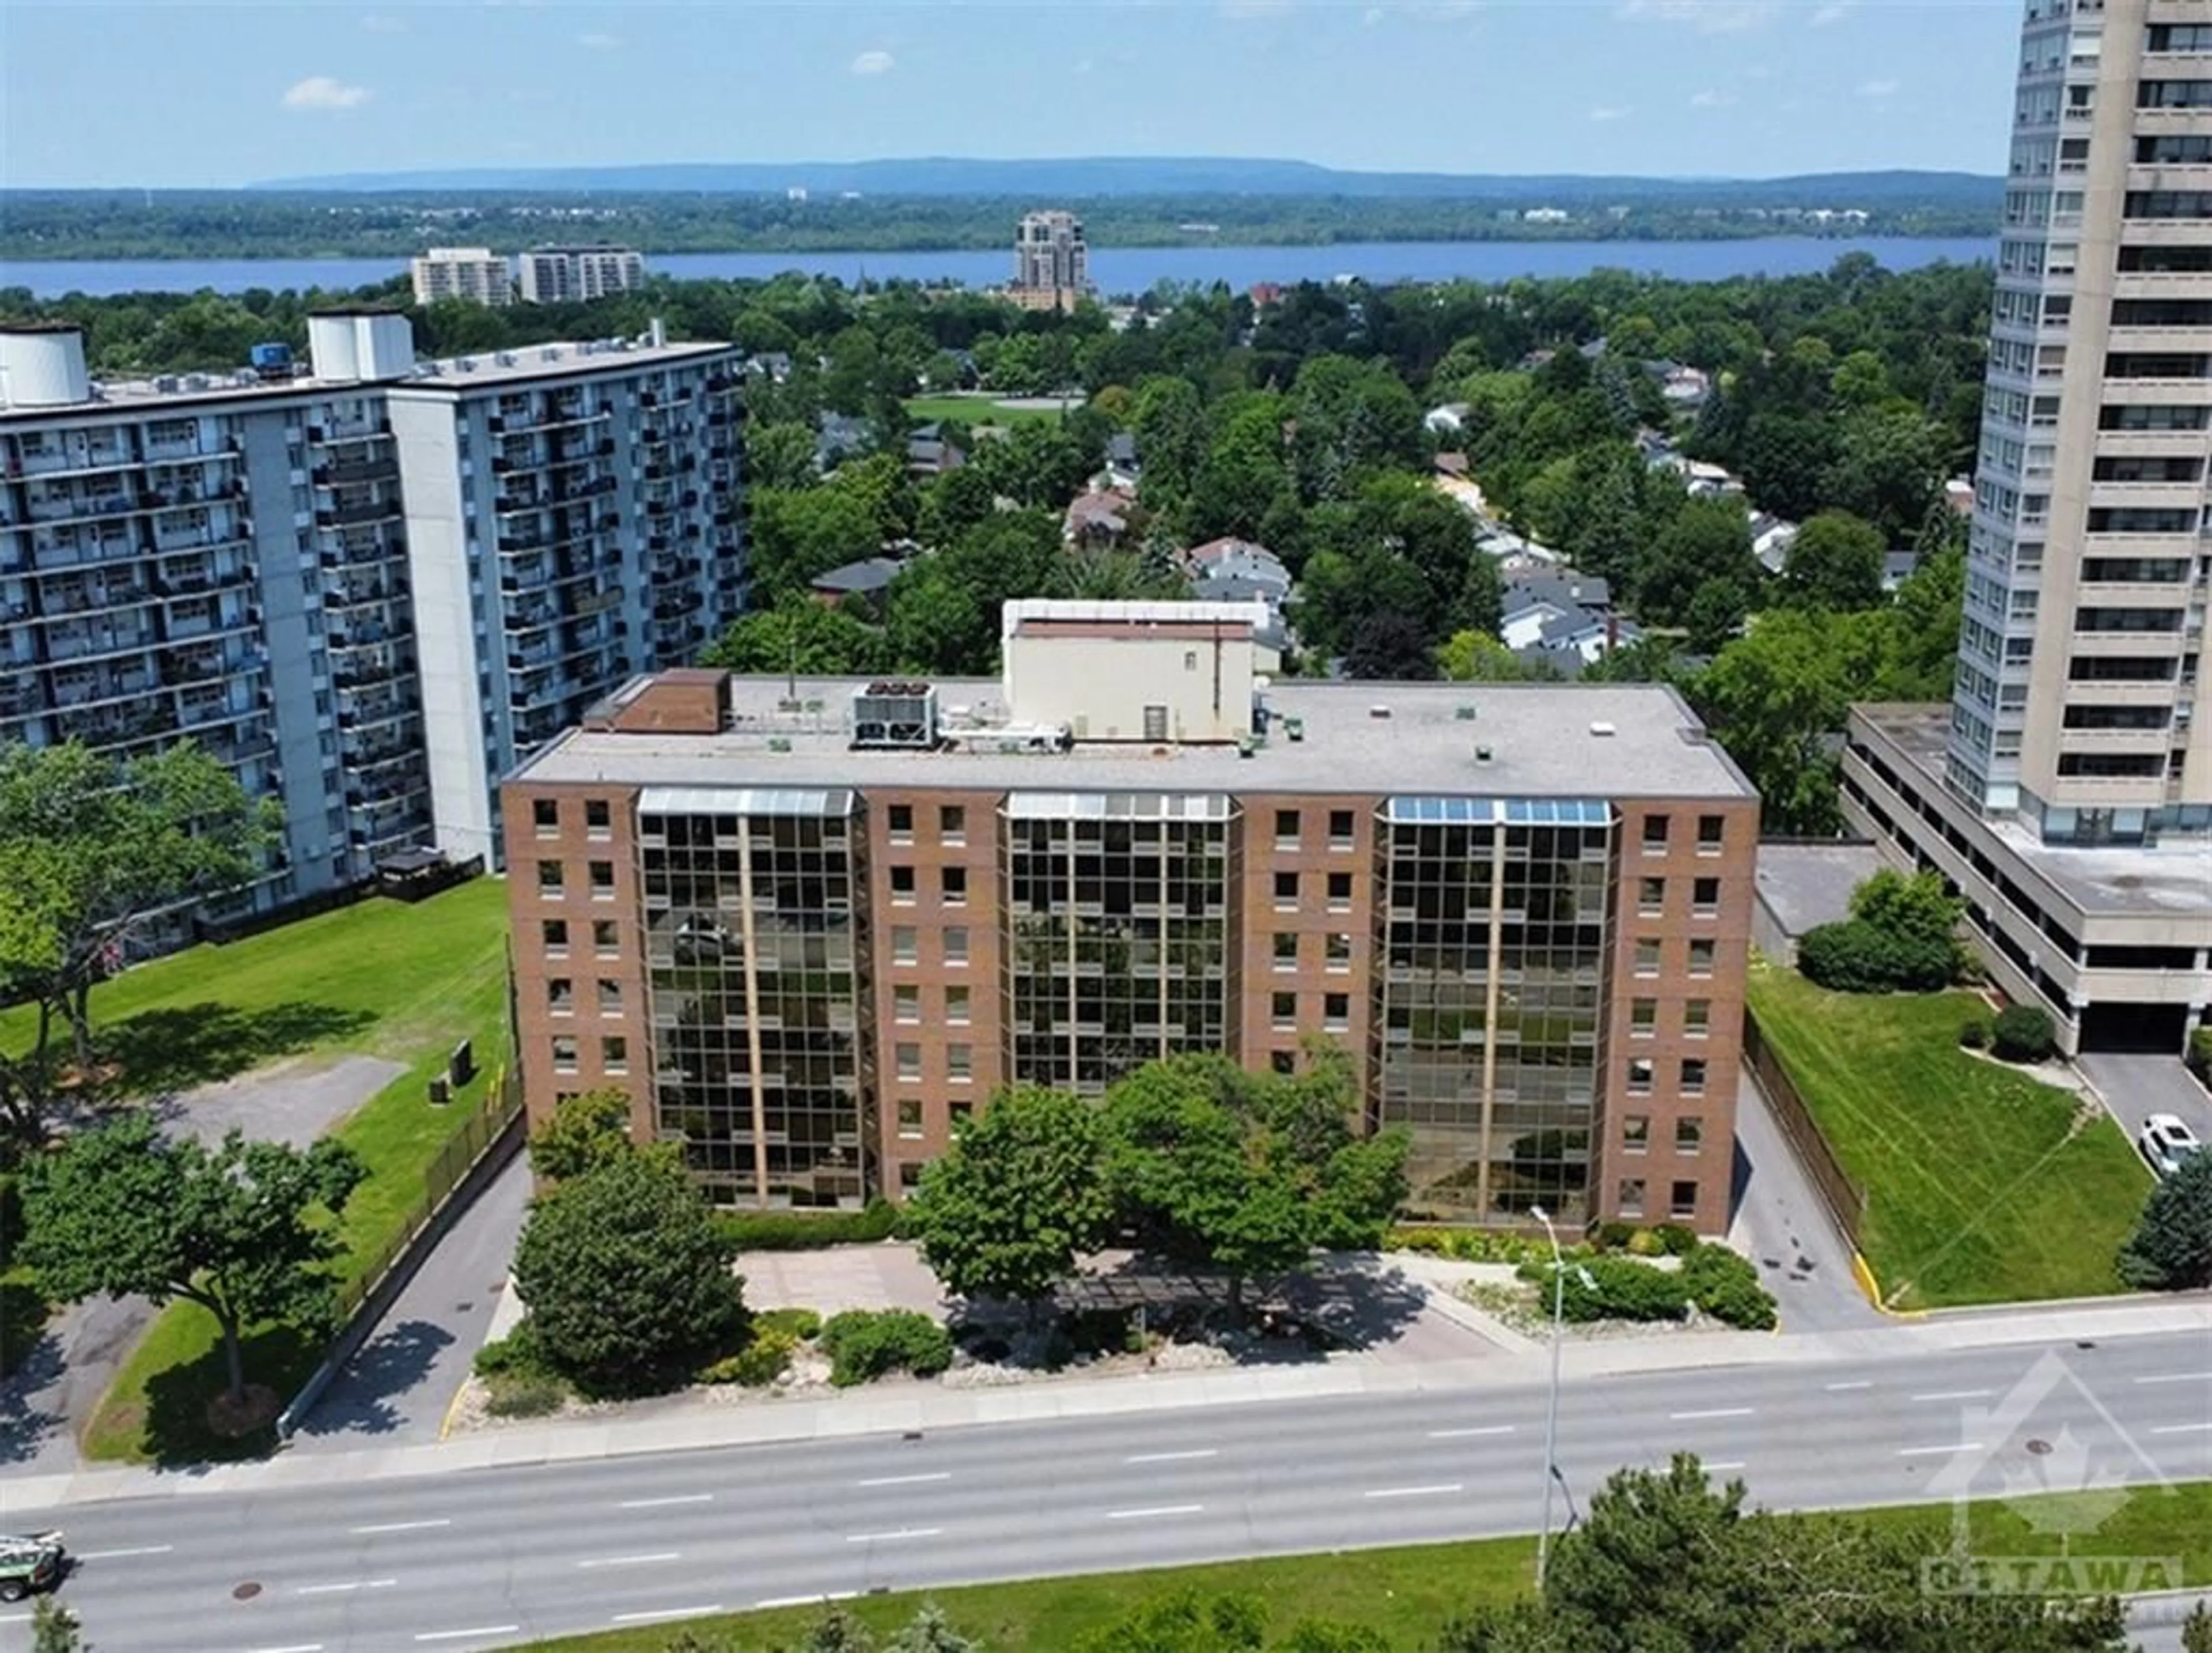 Lakeview for 2019 CARLING Ave #503, Ottawa Ontario K2A 4A2